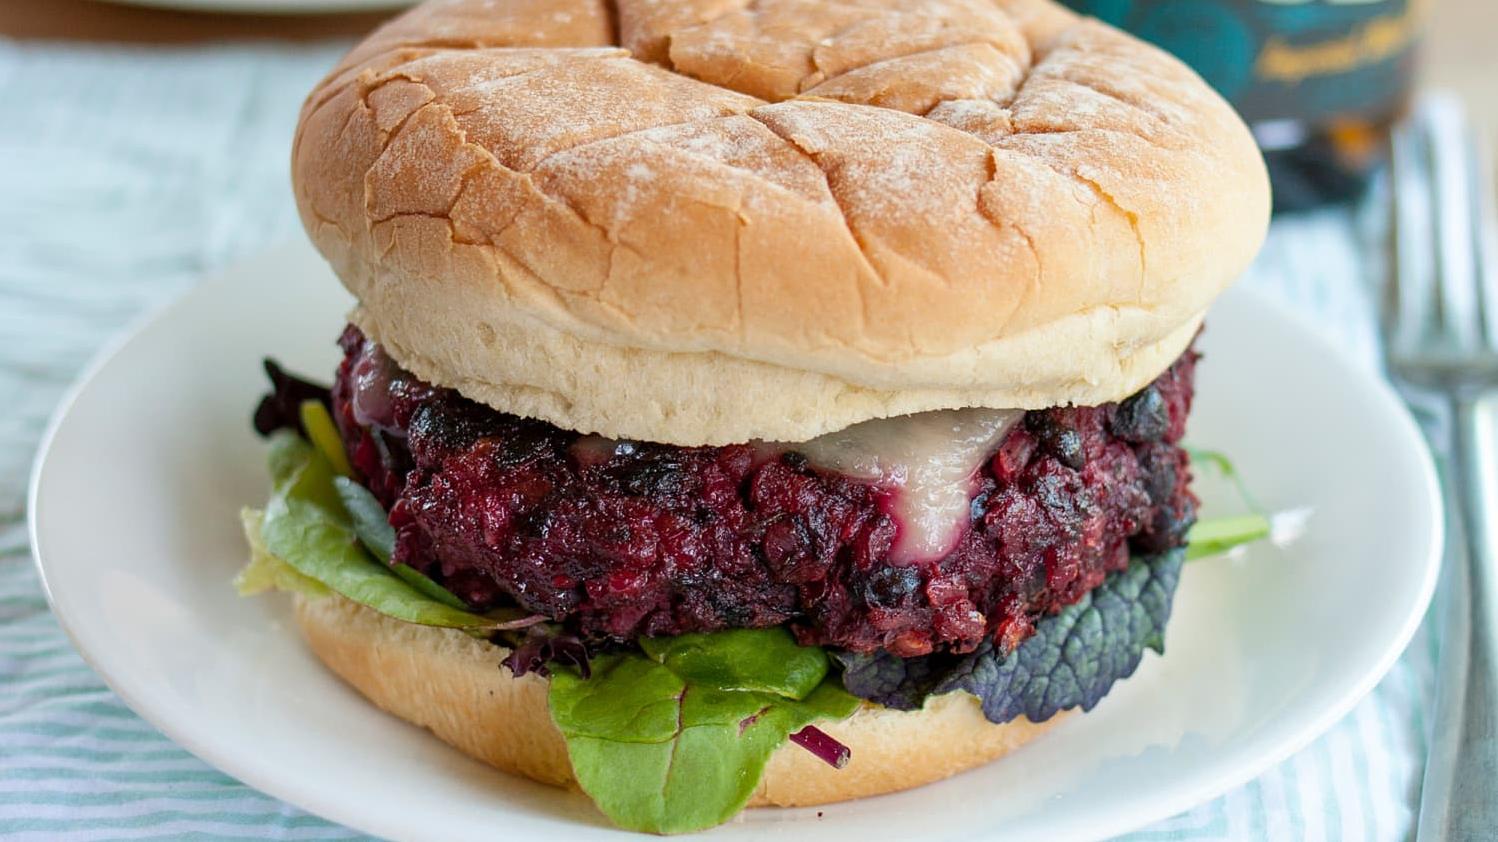  Loaded with fresh produce and served on a soft bun, this burger is almost too beautiful to eat.